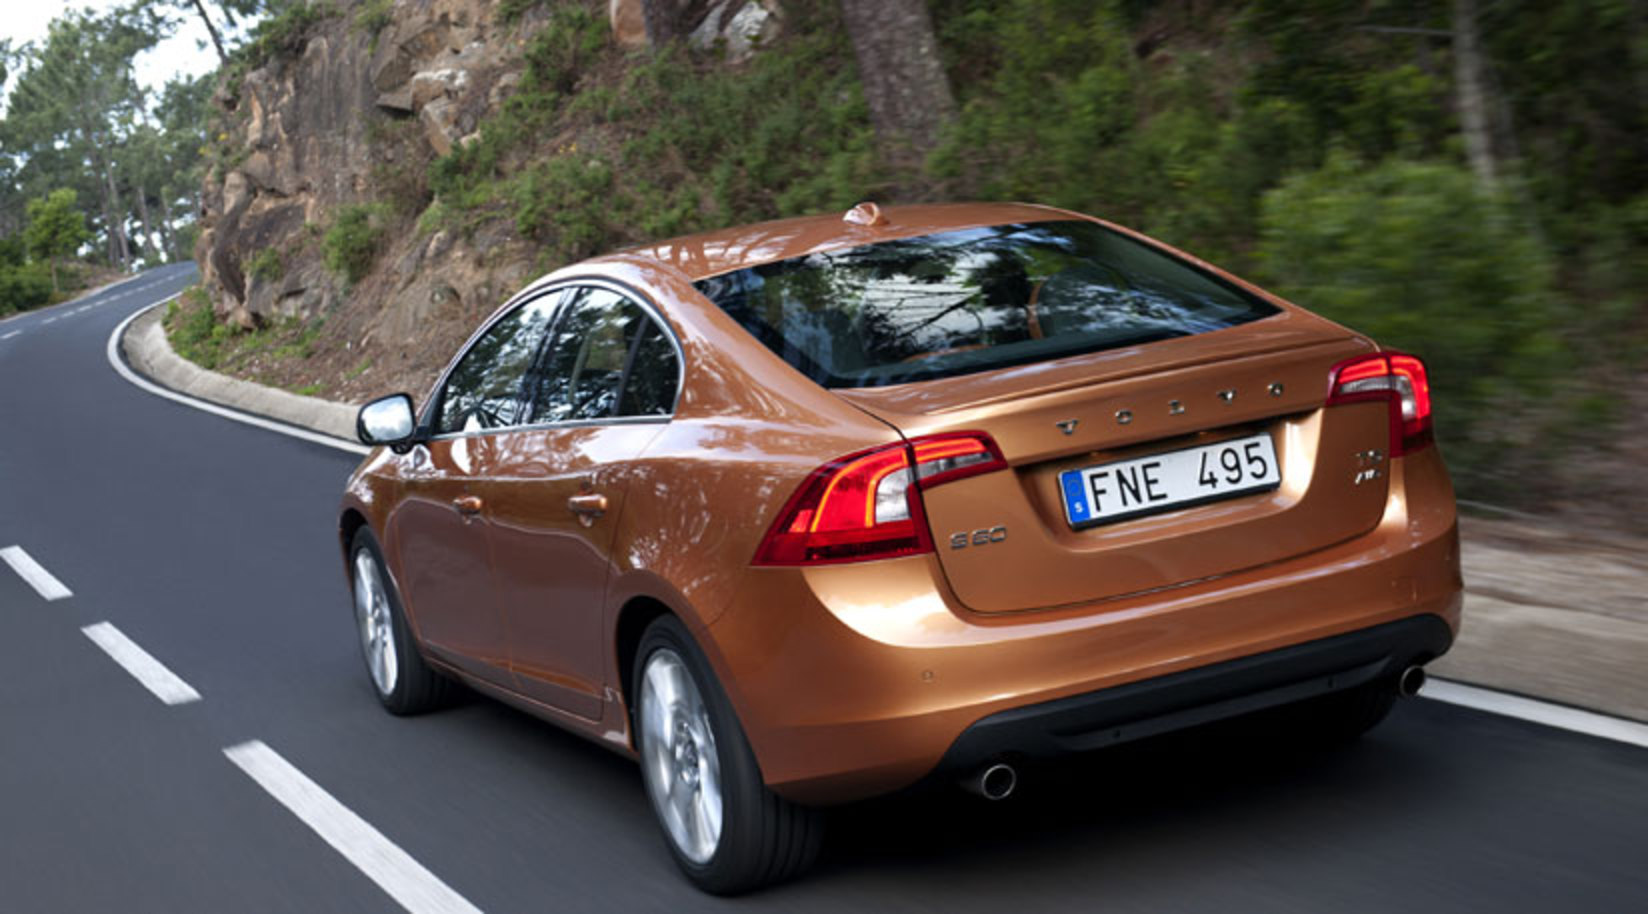 Volvo S60 D5 24 Photo Gallery: Photo #08 out of 11, Image Size ...